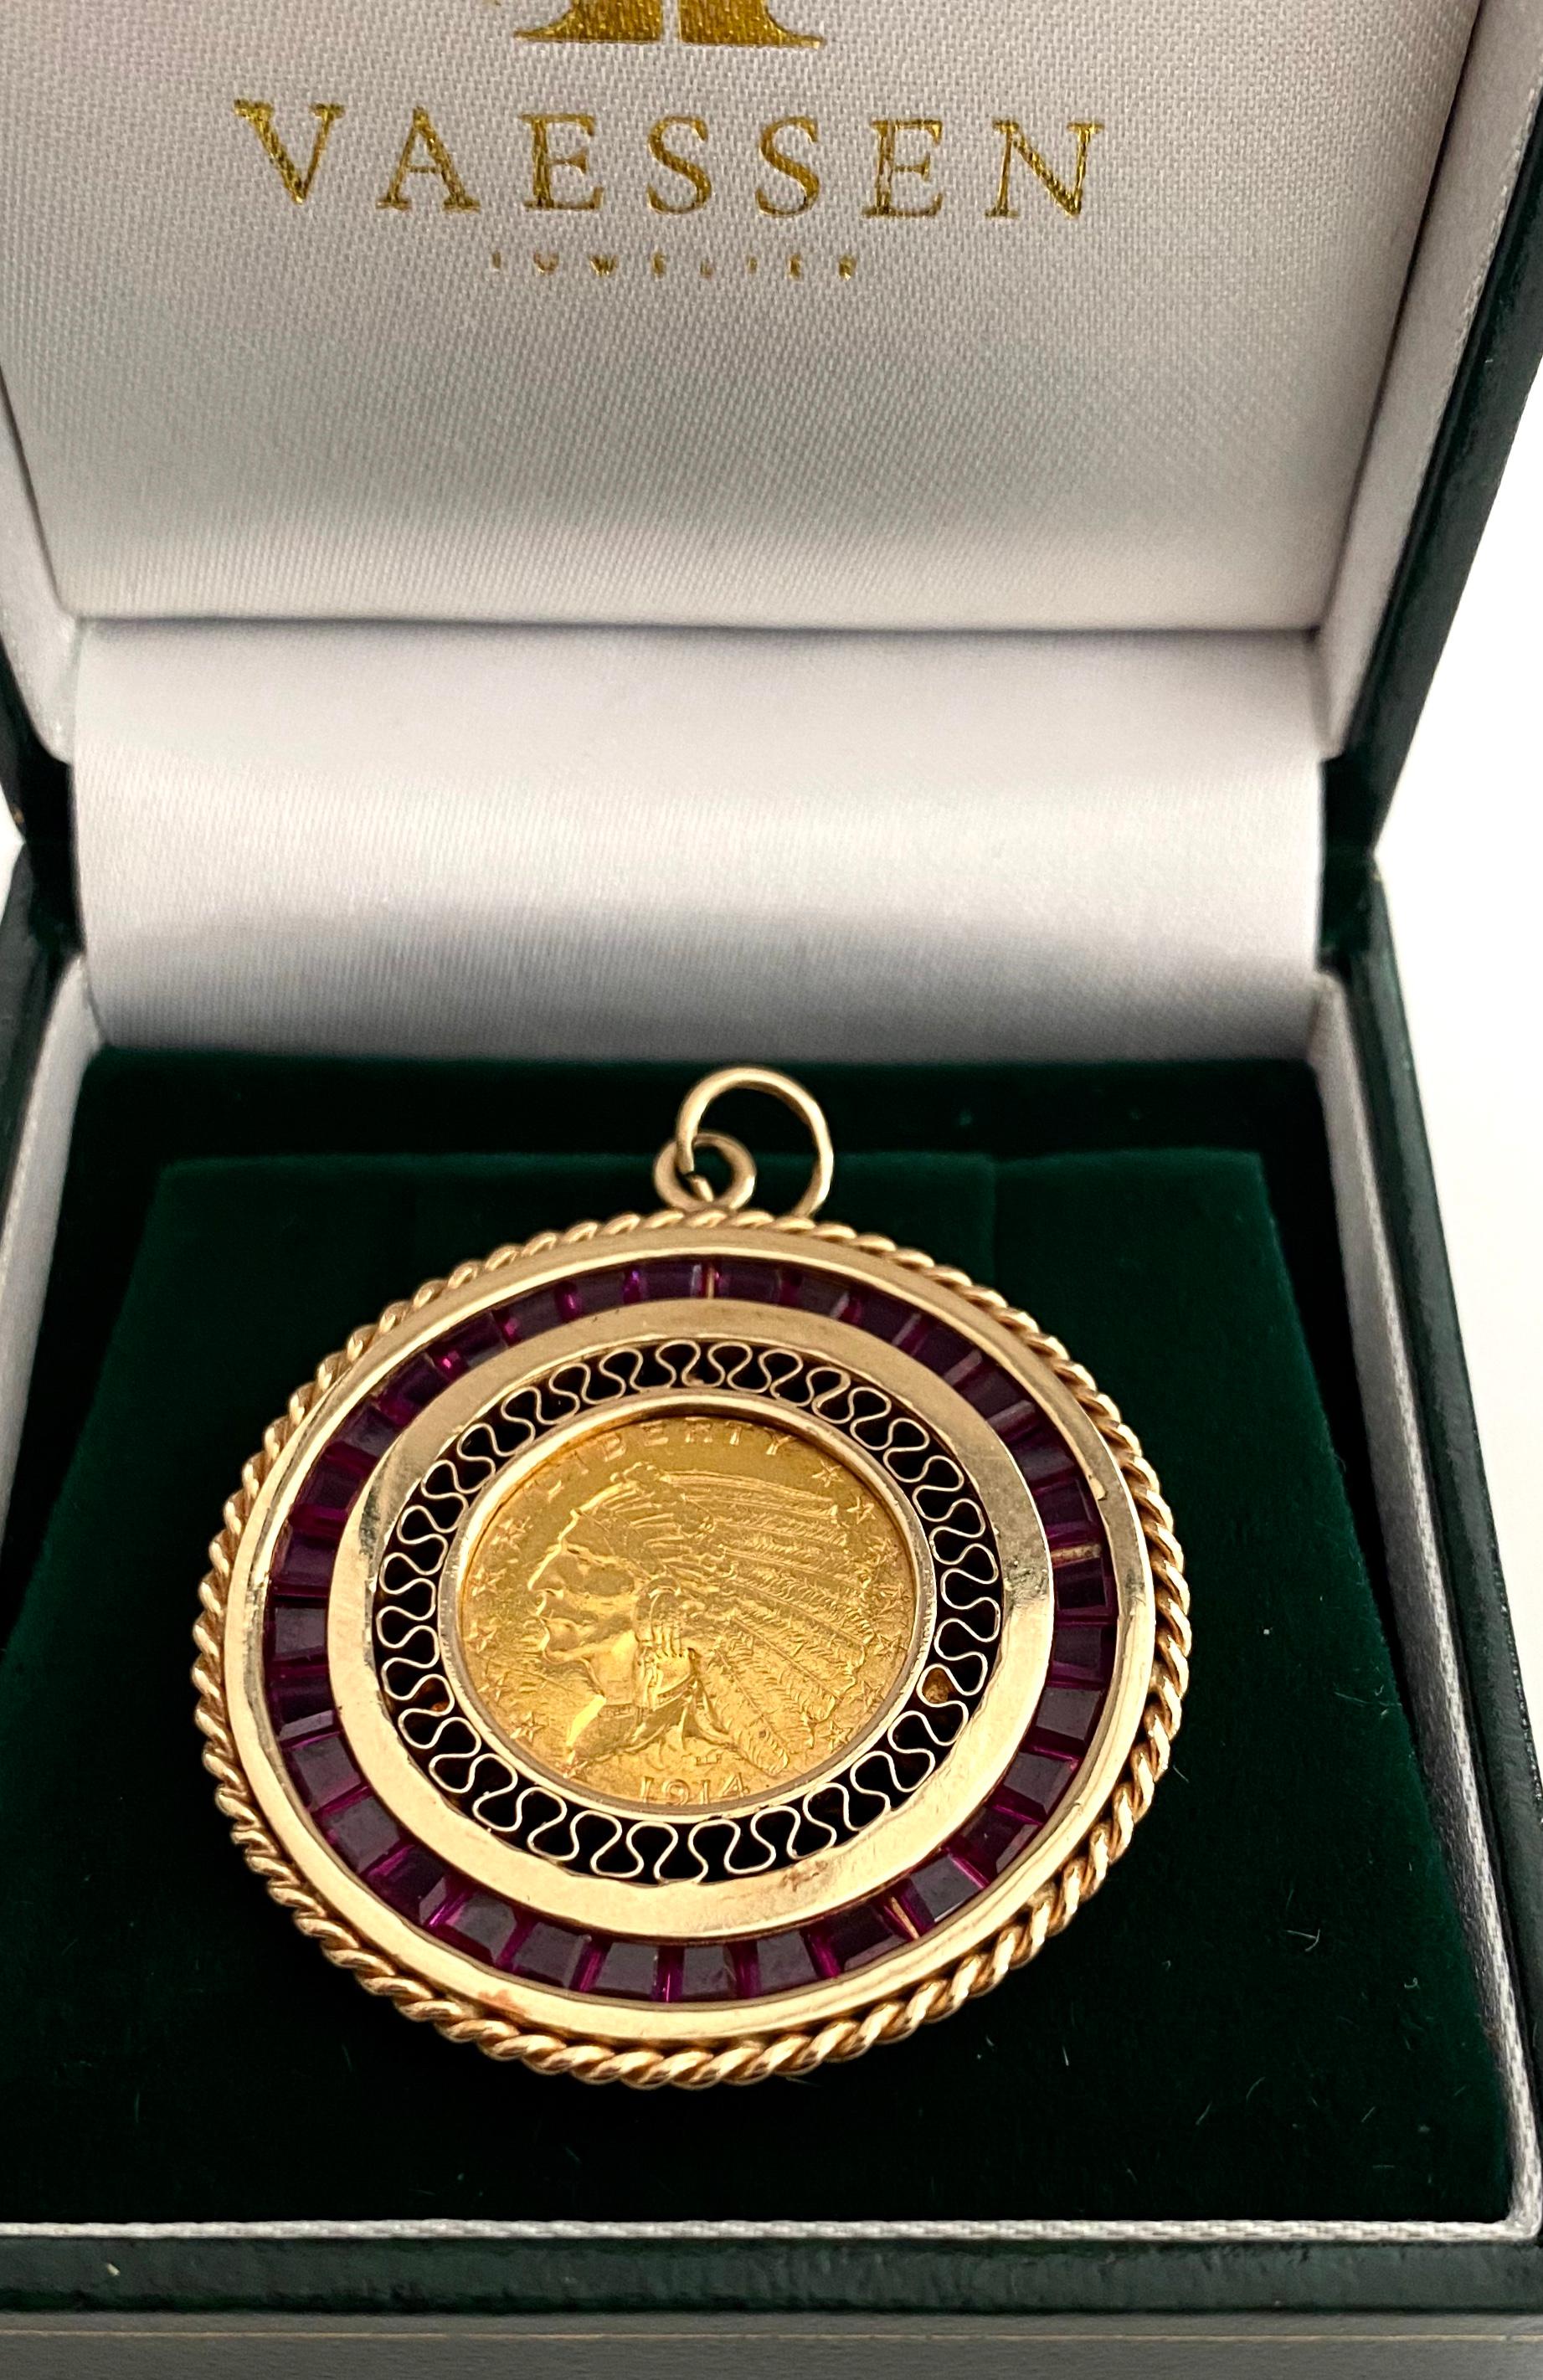 Square Cut 10 Karat Yellow Gold Pendant, Set with Synthetic Ruby's and 2 1/2 $ Coin 1914